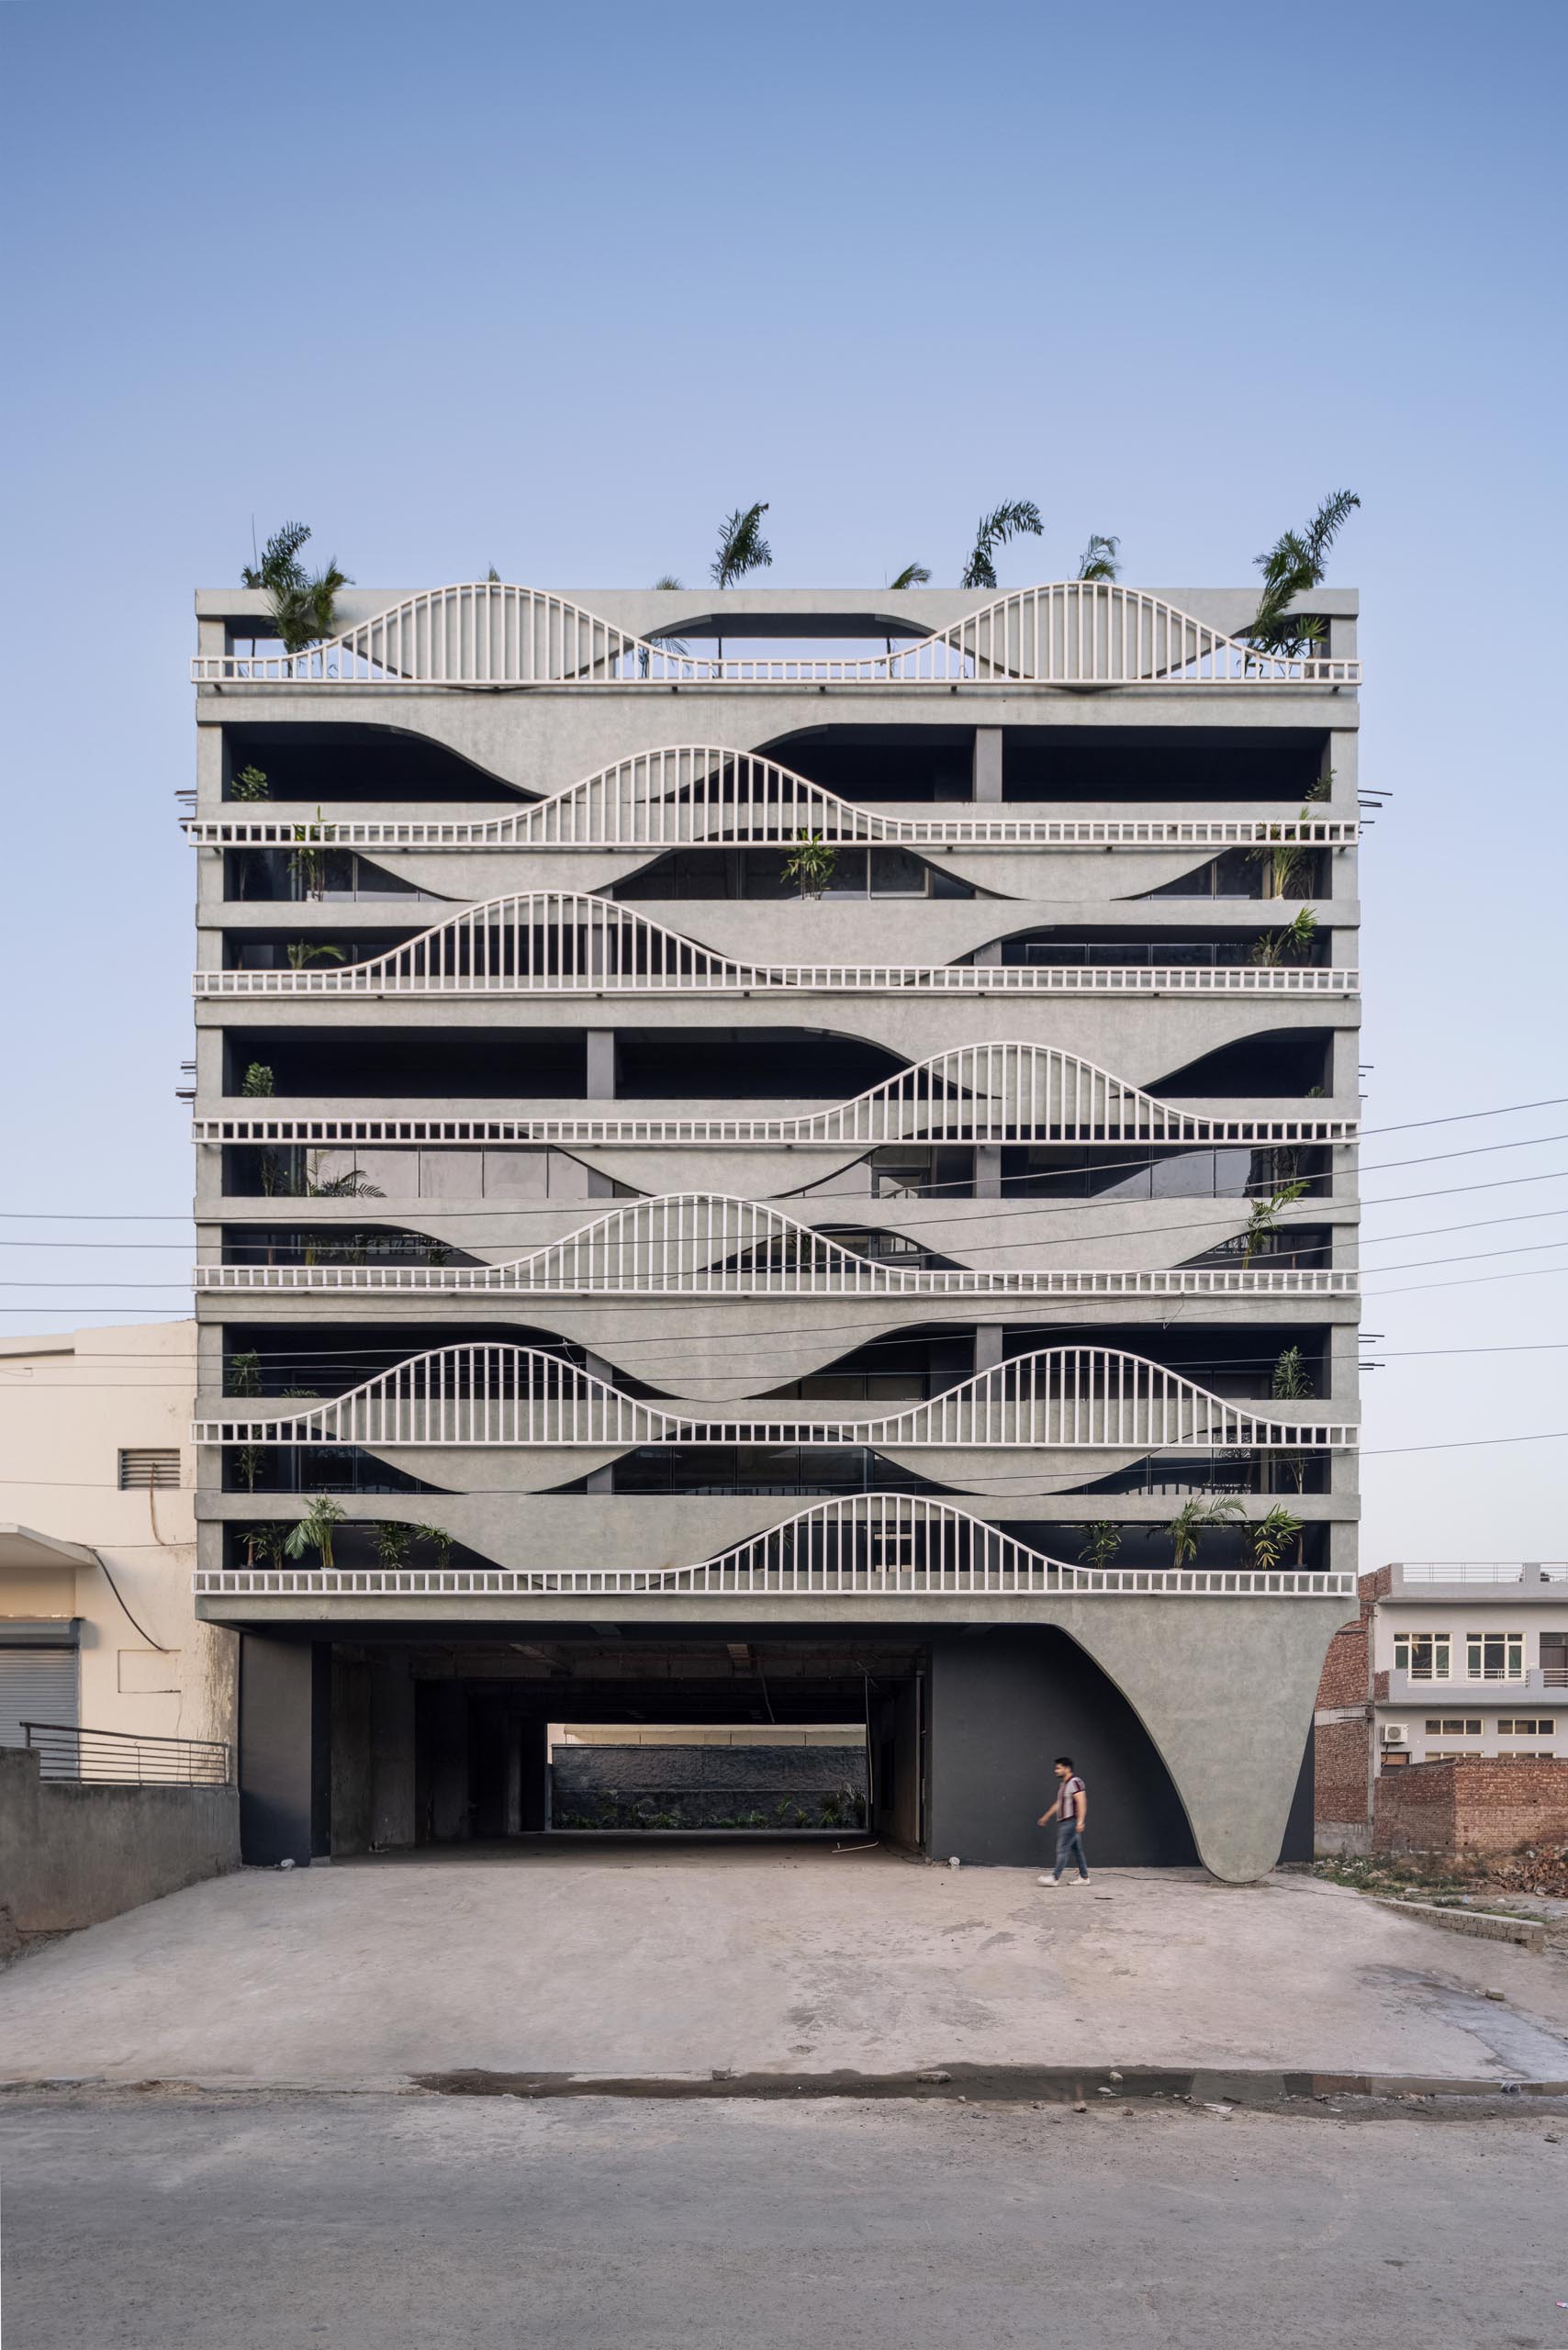 A unique building facade that's designed to look like melting concrete.